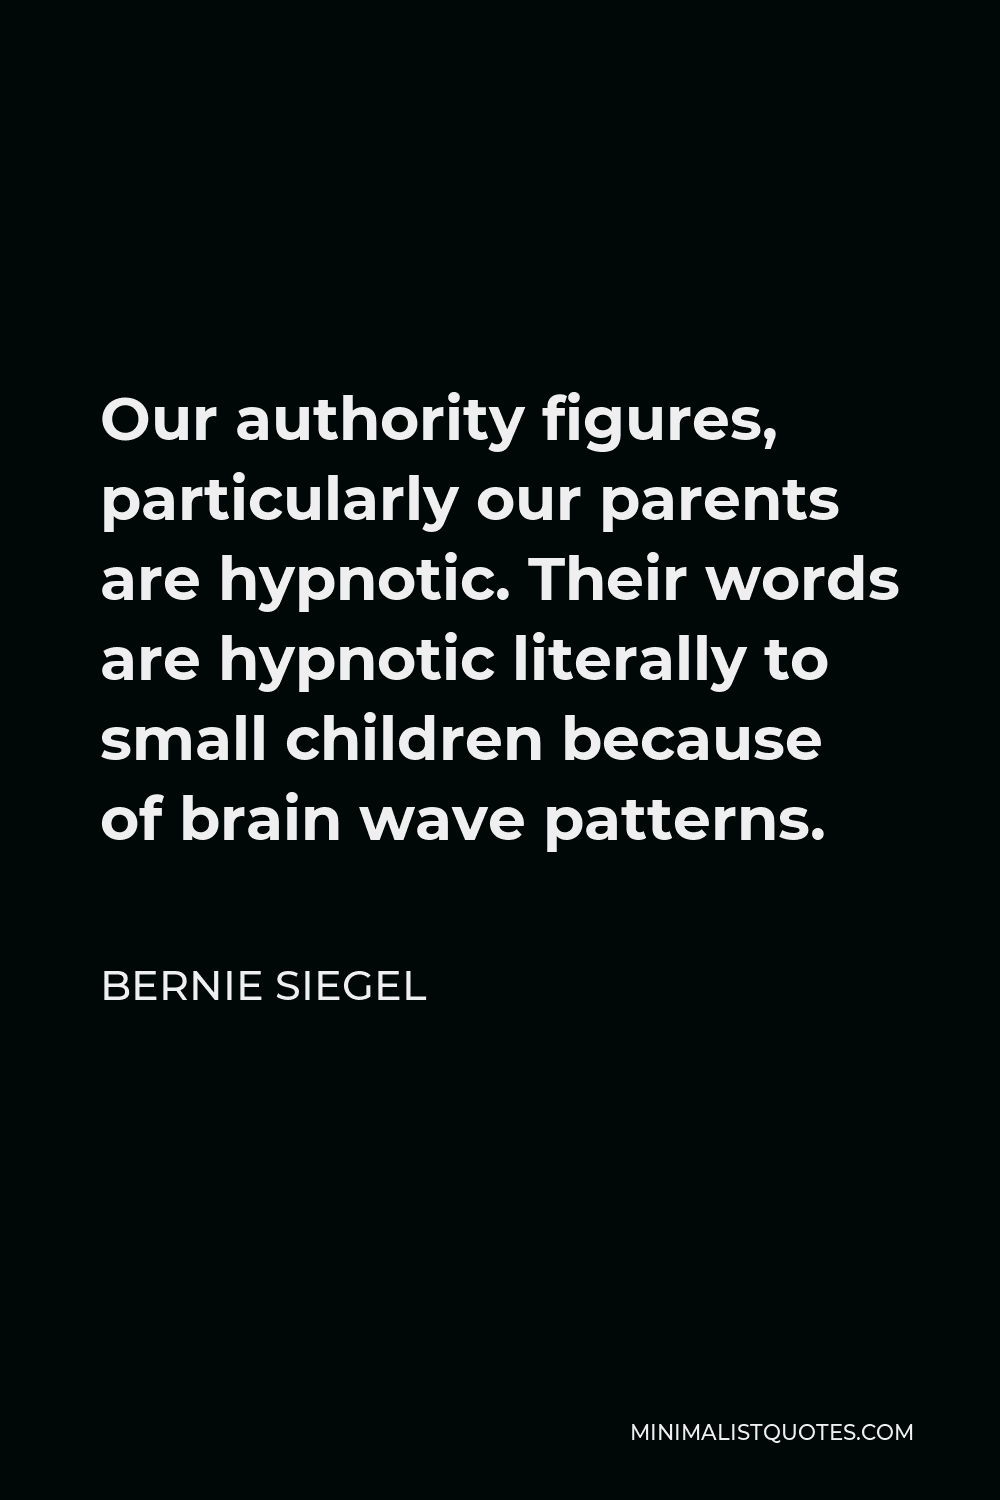 Bernie Siegel Quote - Our authority figures, particularly our parents are hypnotic. Their words are hypnotic literally to small children because of brain wave patterns.